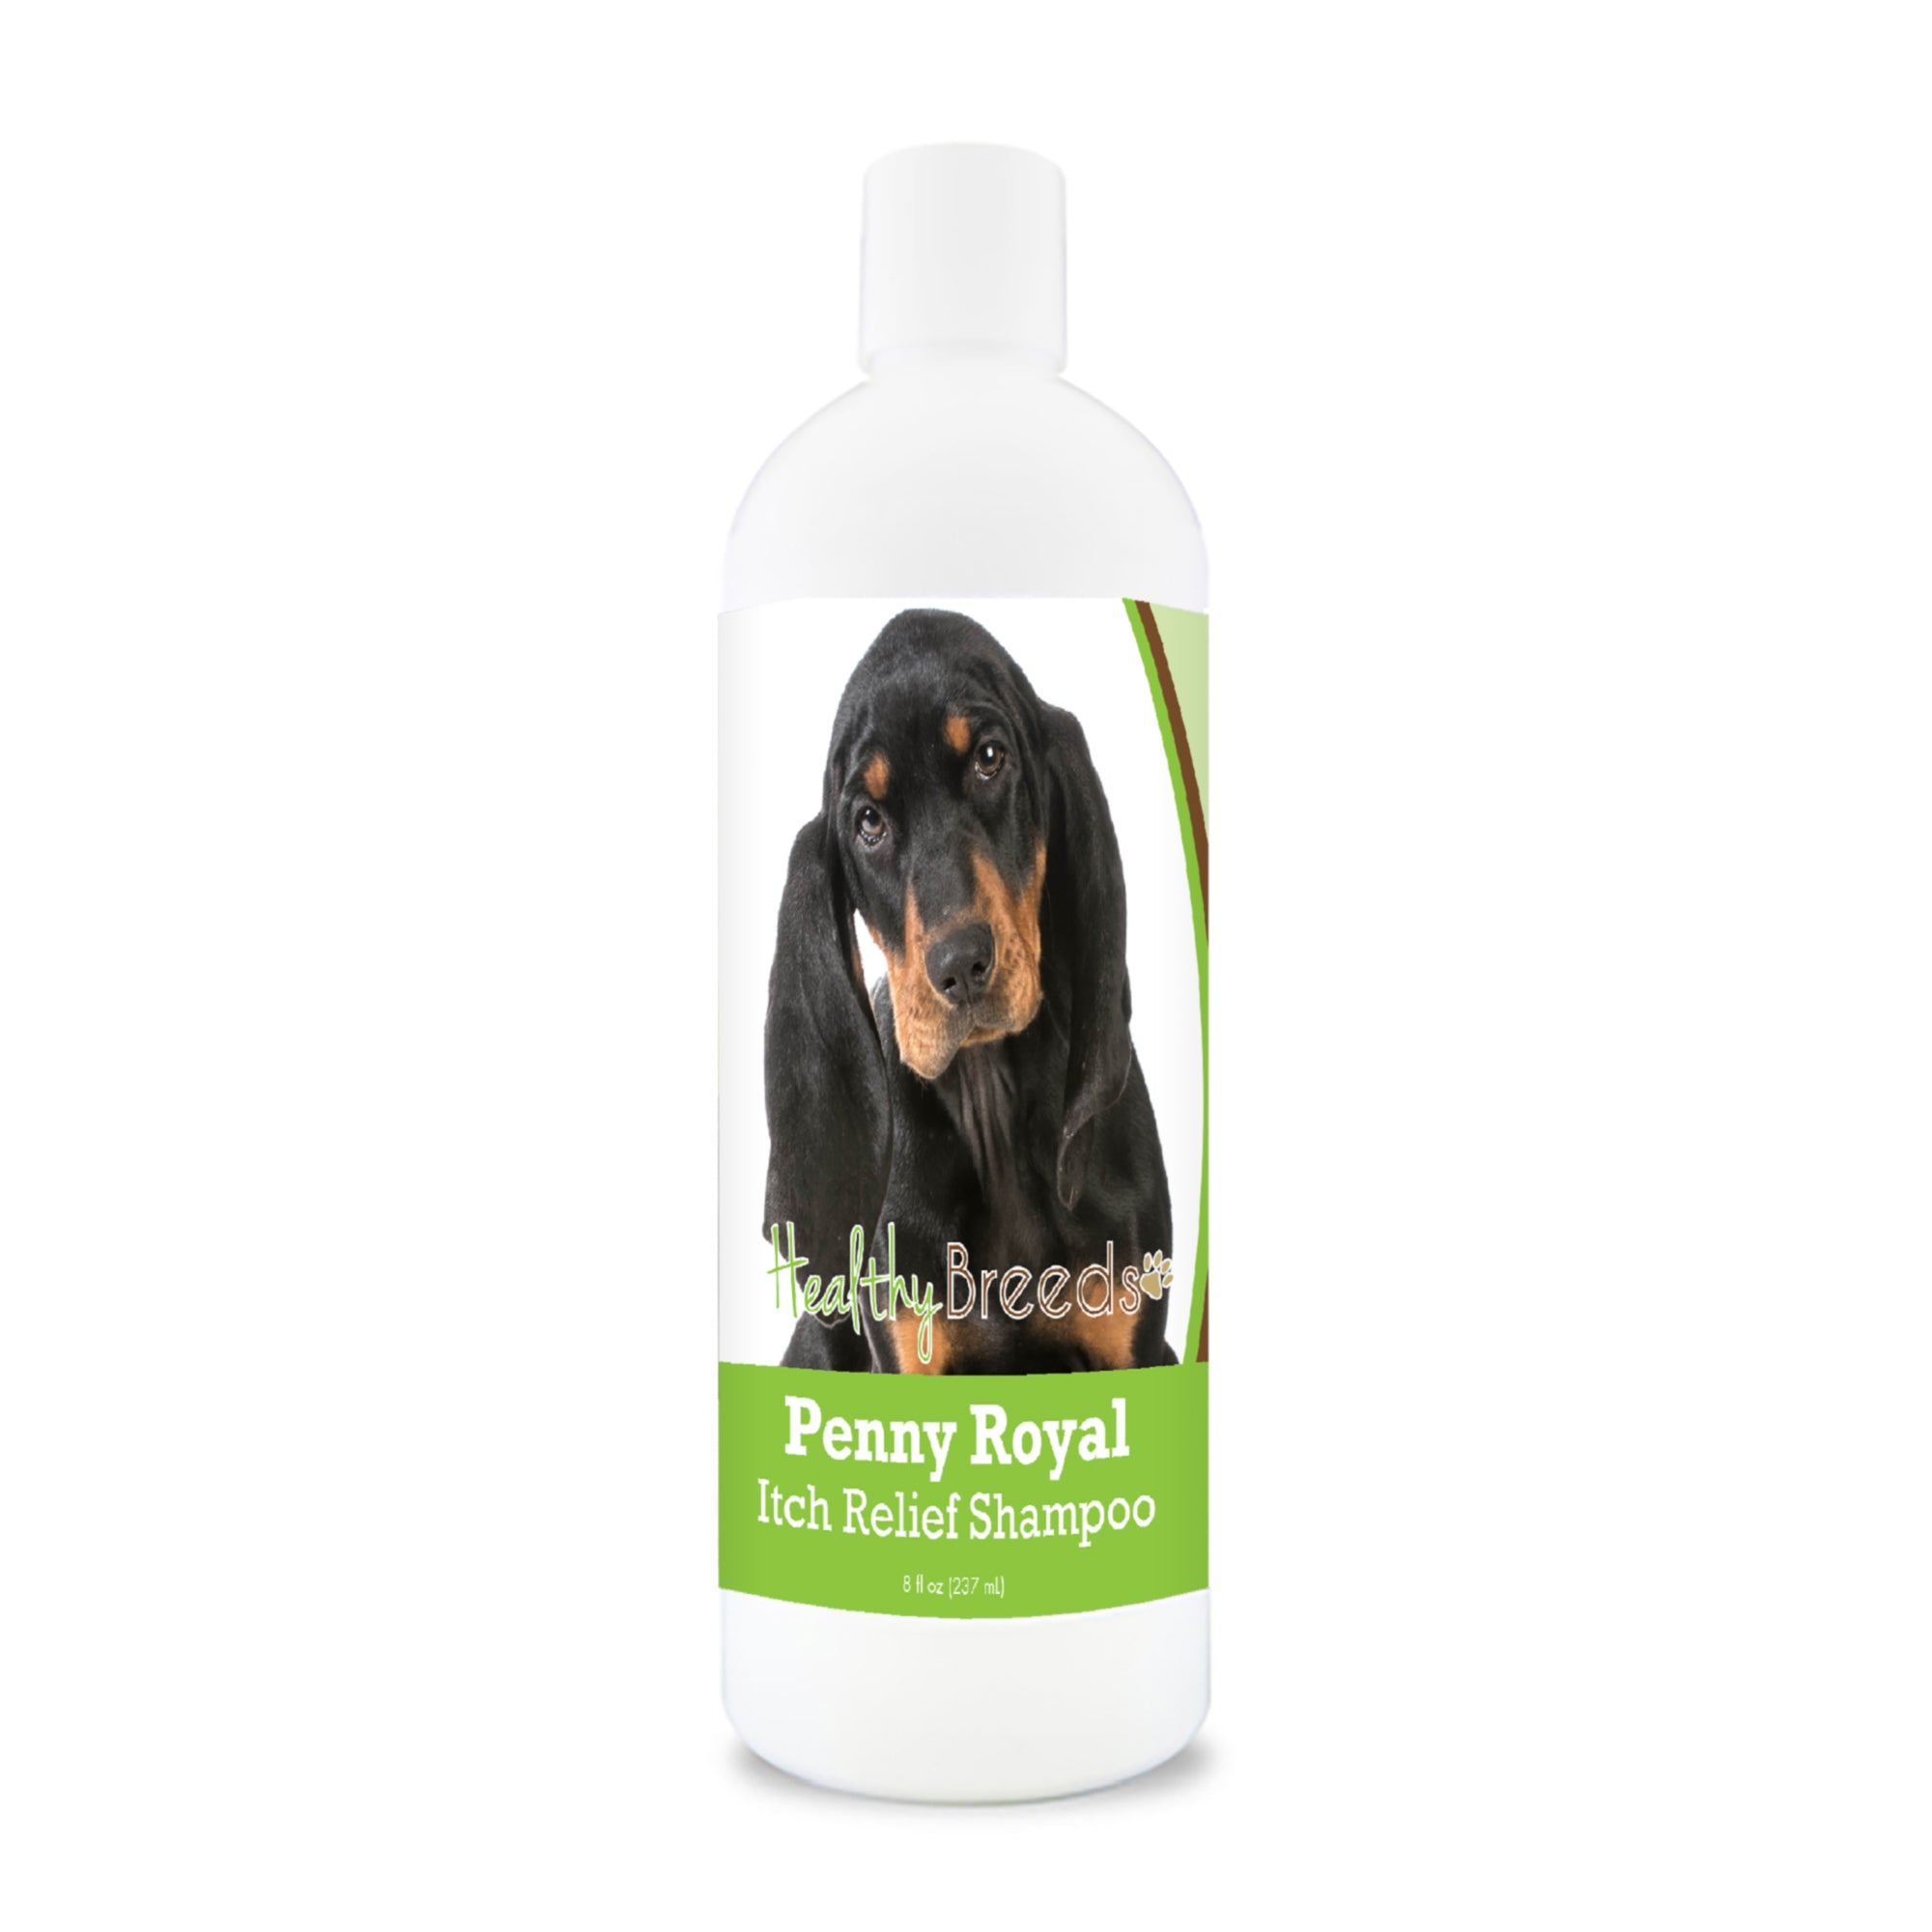 Black and Tan Coonhound Penny Royal Itch Relief Shampoo 8 oz